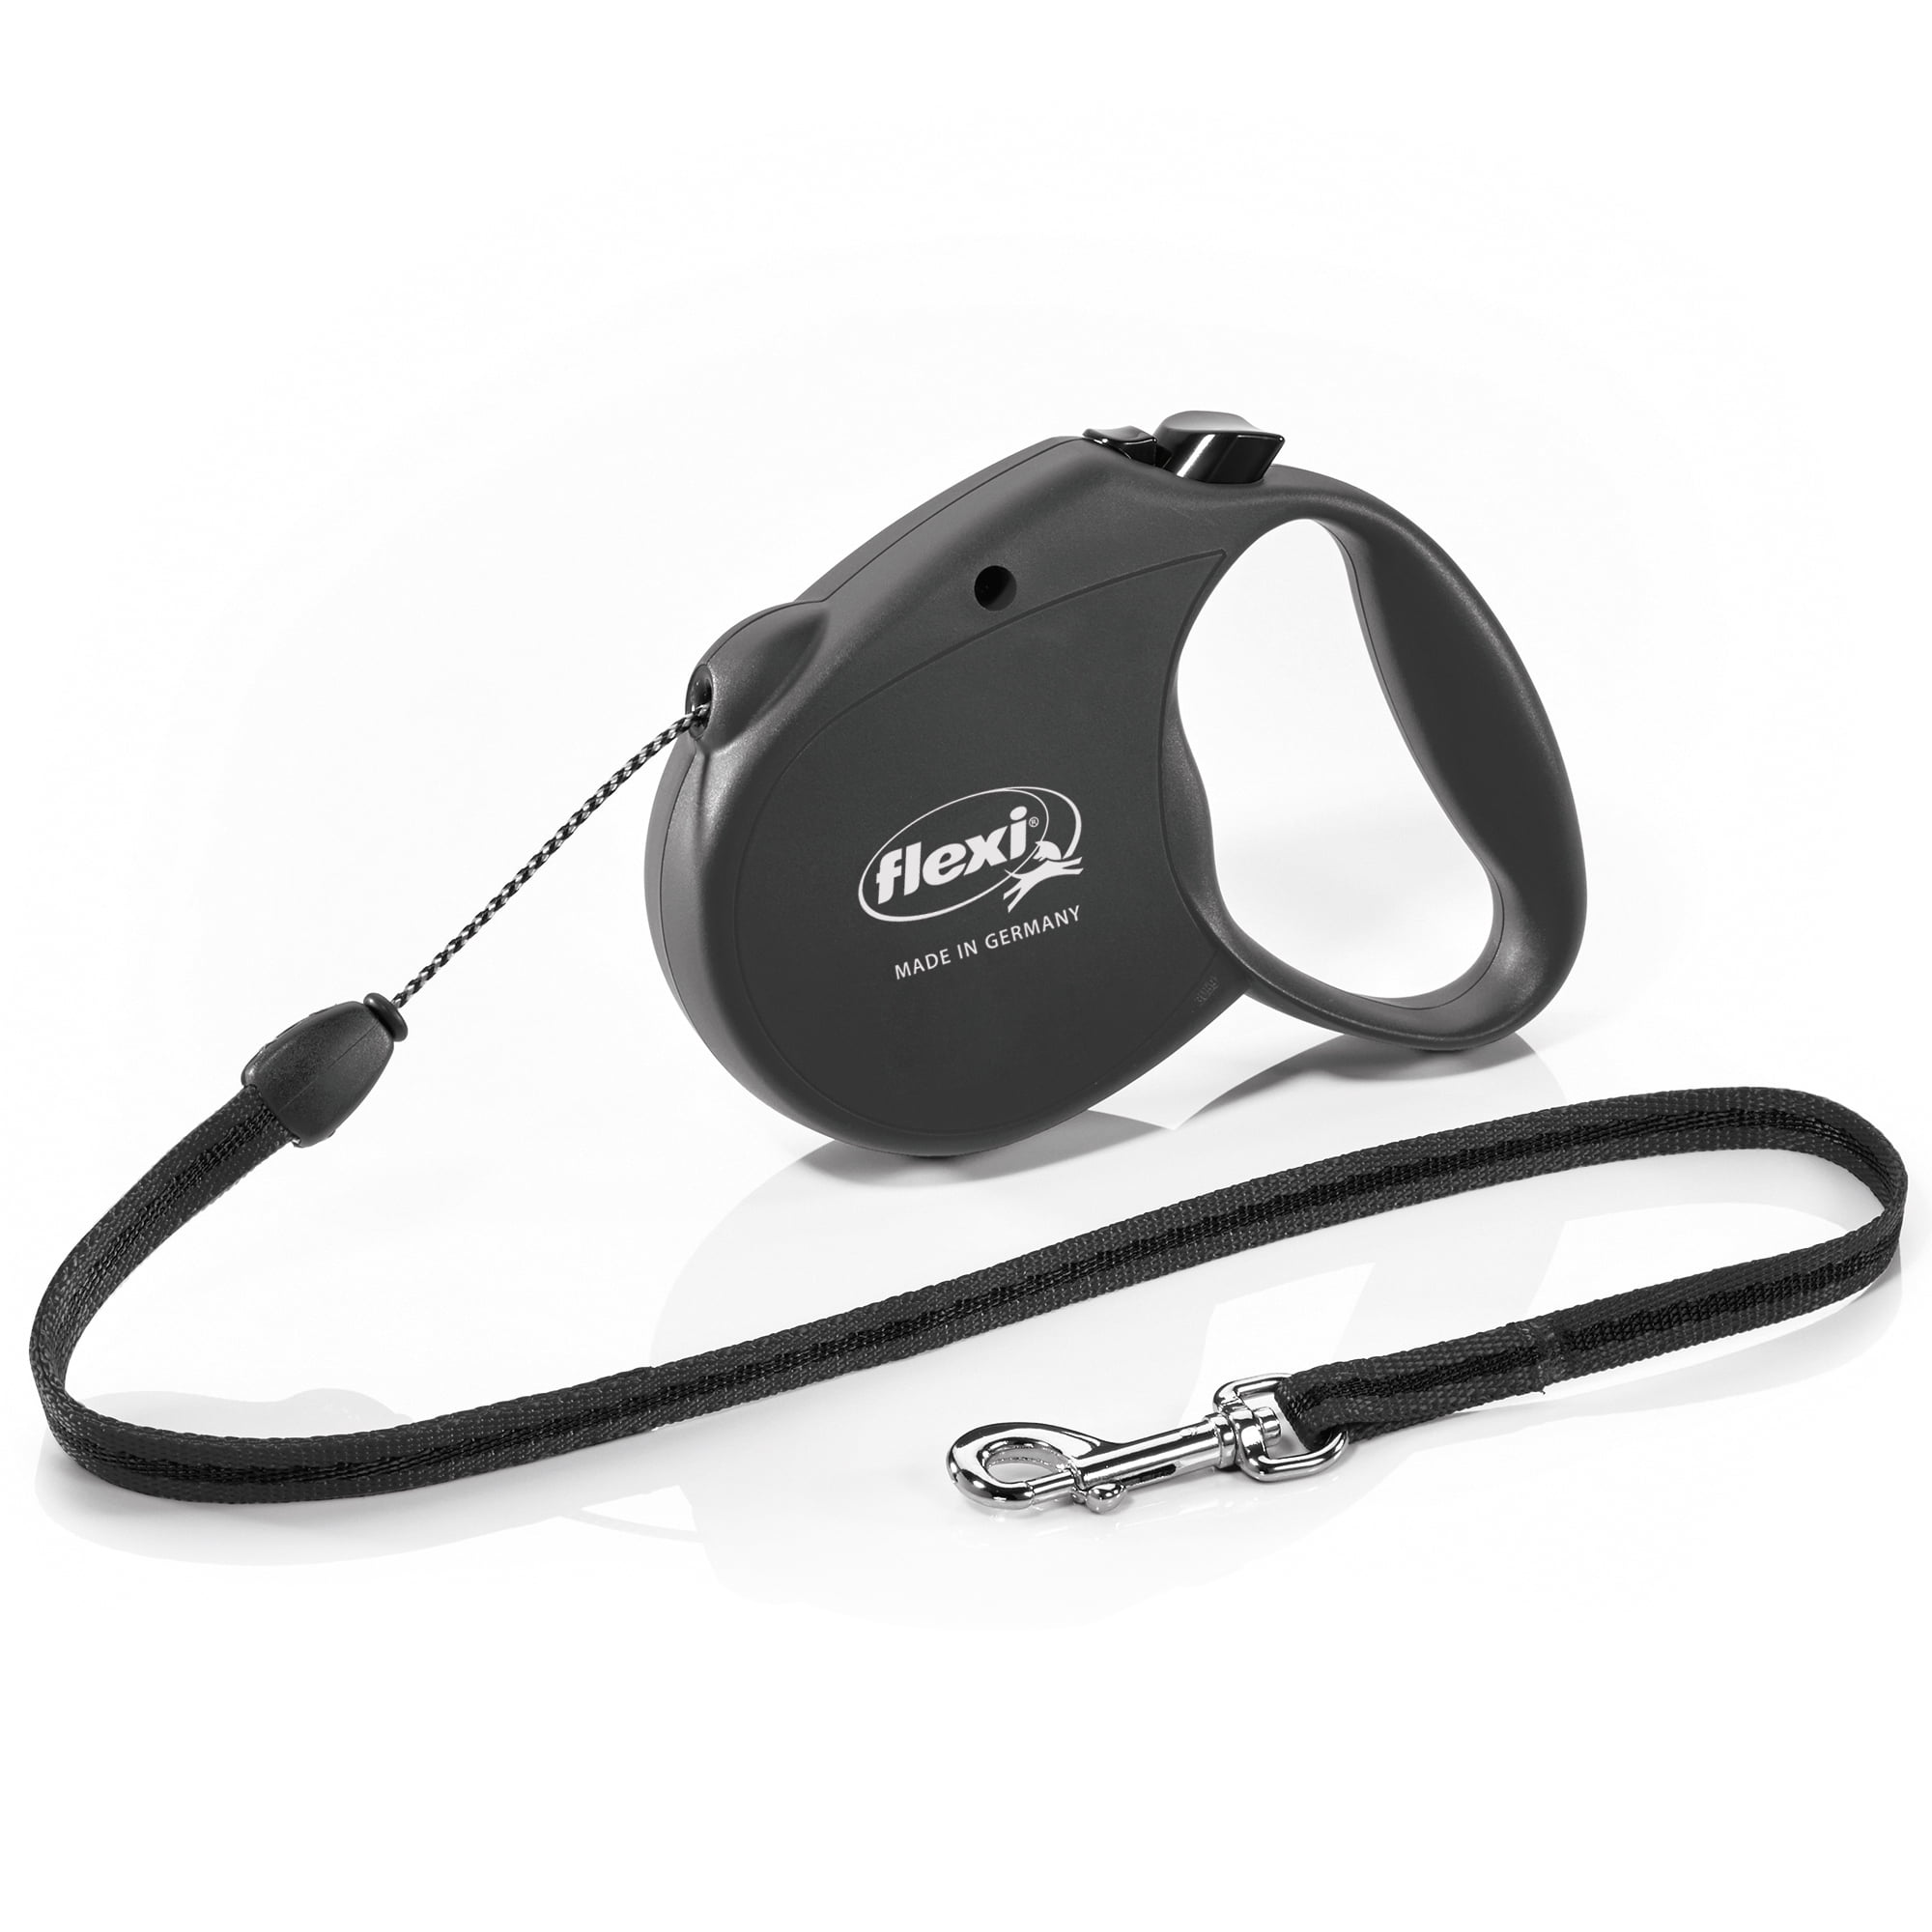 Medium Hyper Pet Retractable Dog Leash Black 16 ft Walking Leash for Dogs up to 40 lbs